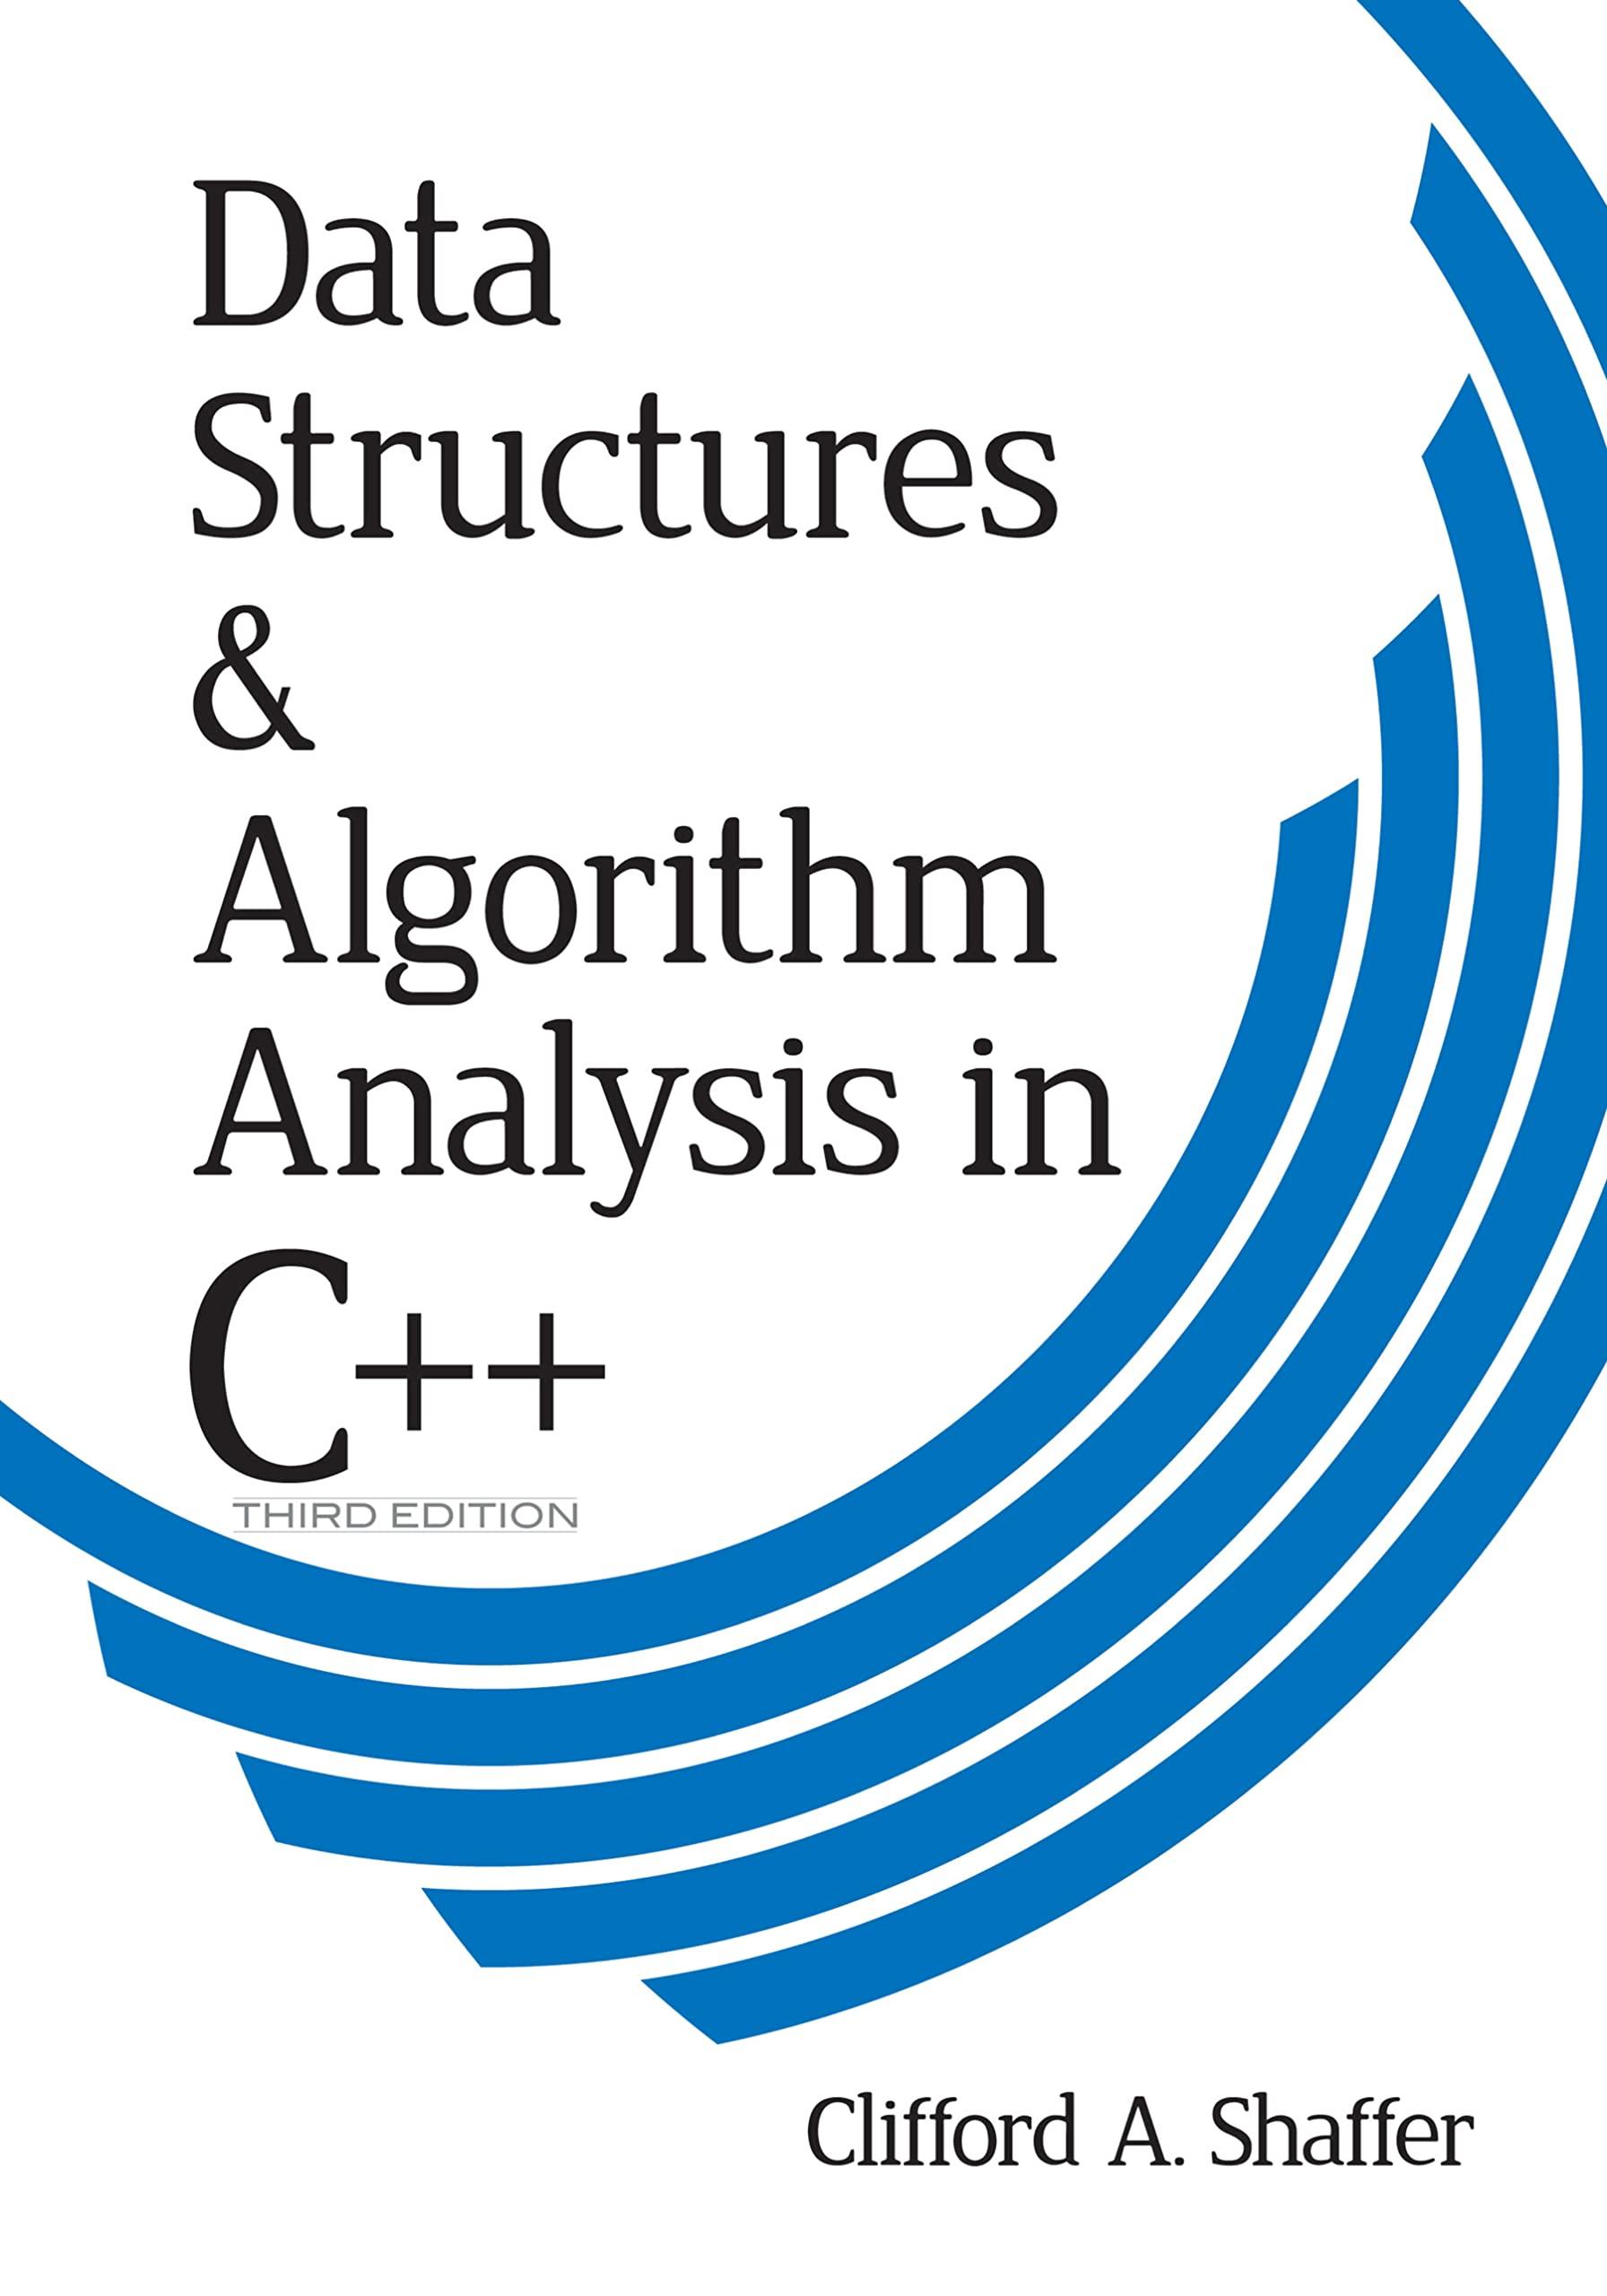 data structures and algorithm analysis in c++ 3rd edition dr. clifford a. shaffer 048648582x, 9780486485829